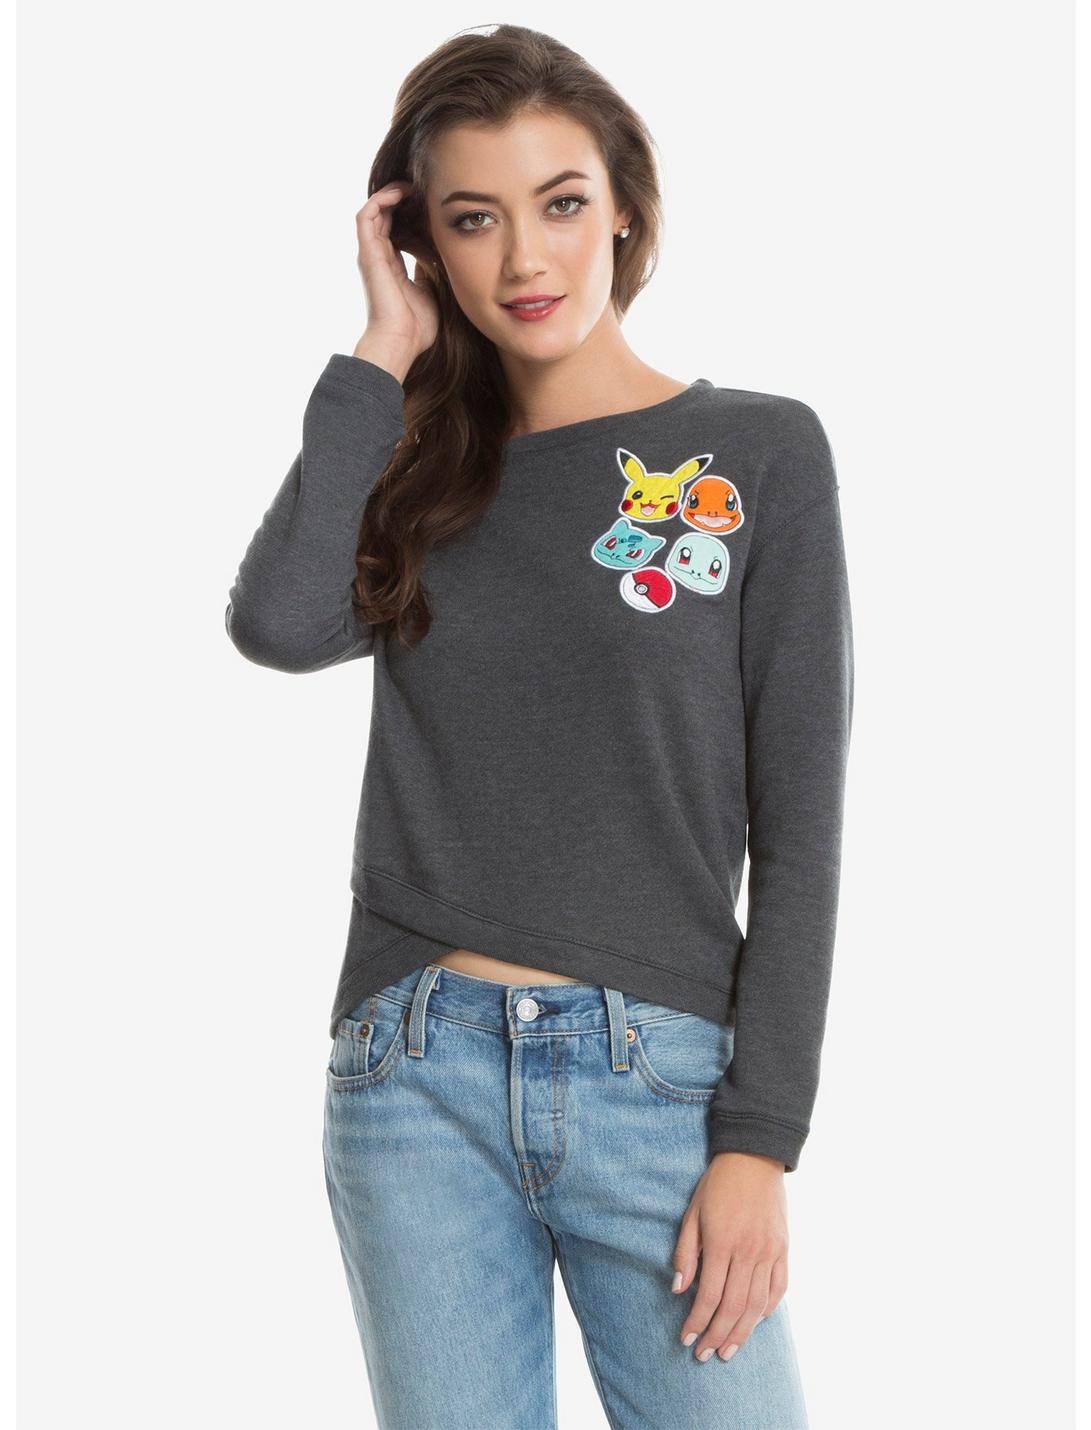 Pokémon Patches Womens Pullover, GREY, hi-res